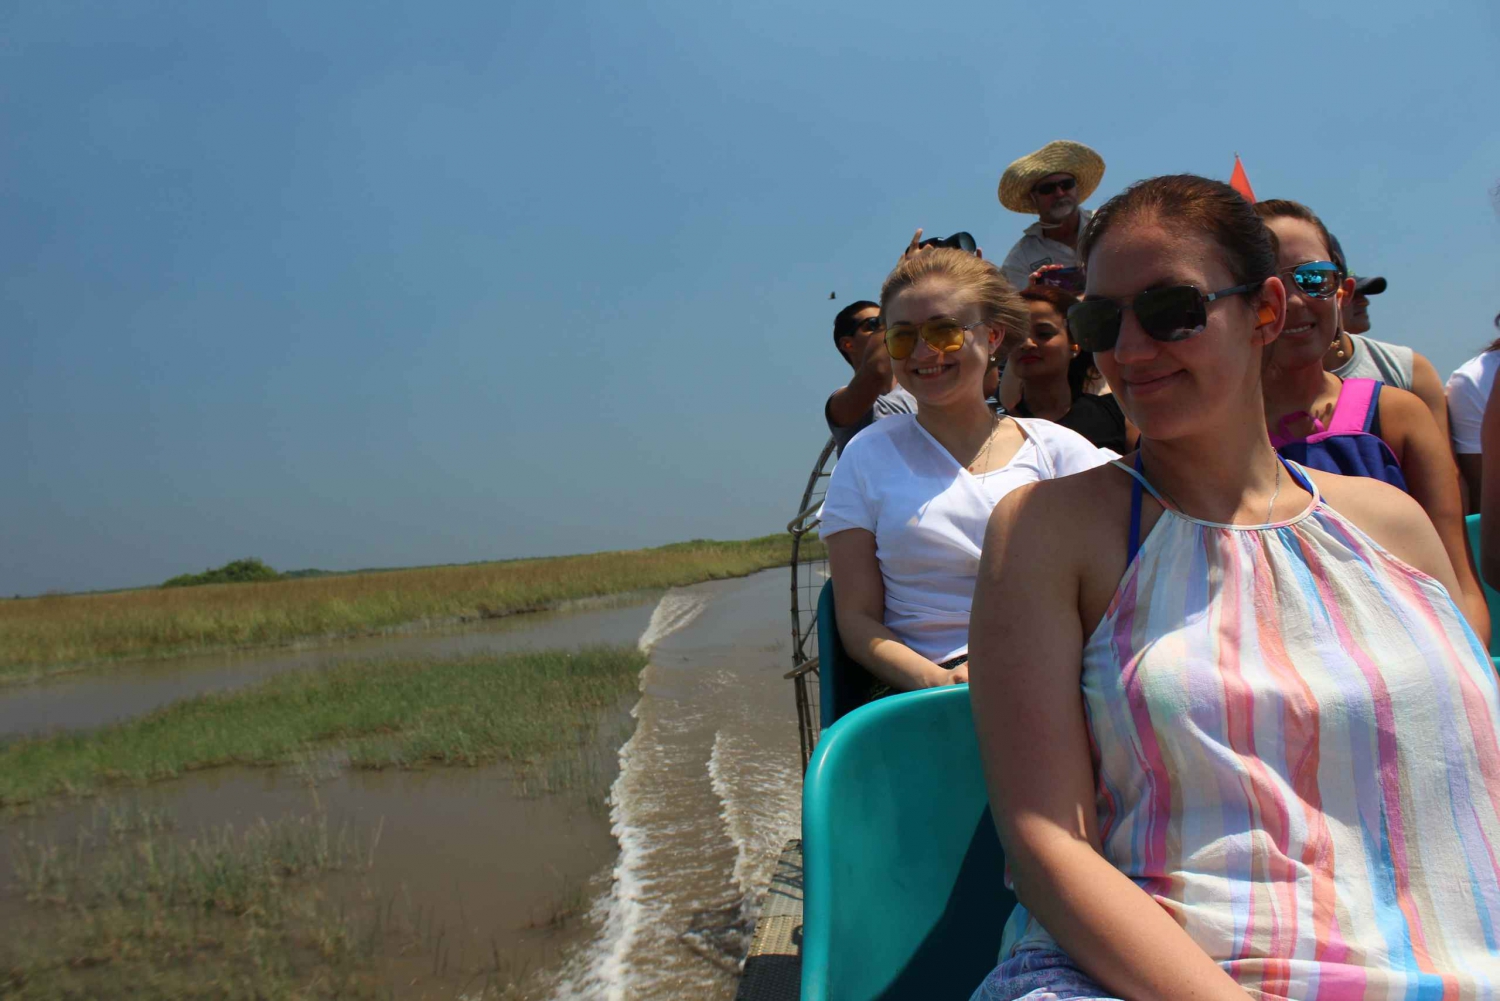 Wildlife Show & Everglades Motorboat Ride with Hotel Pickup